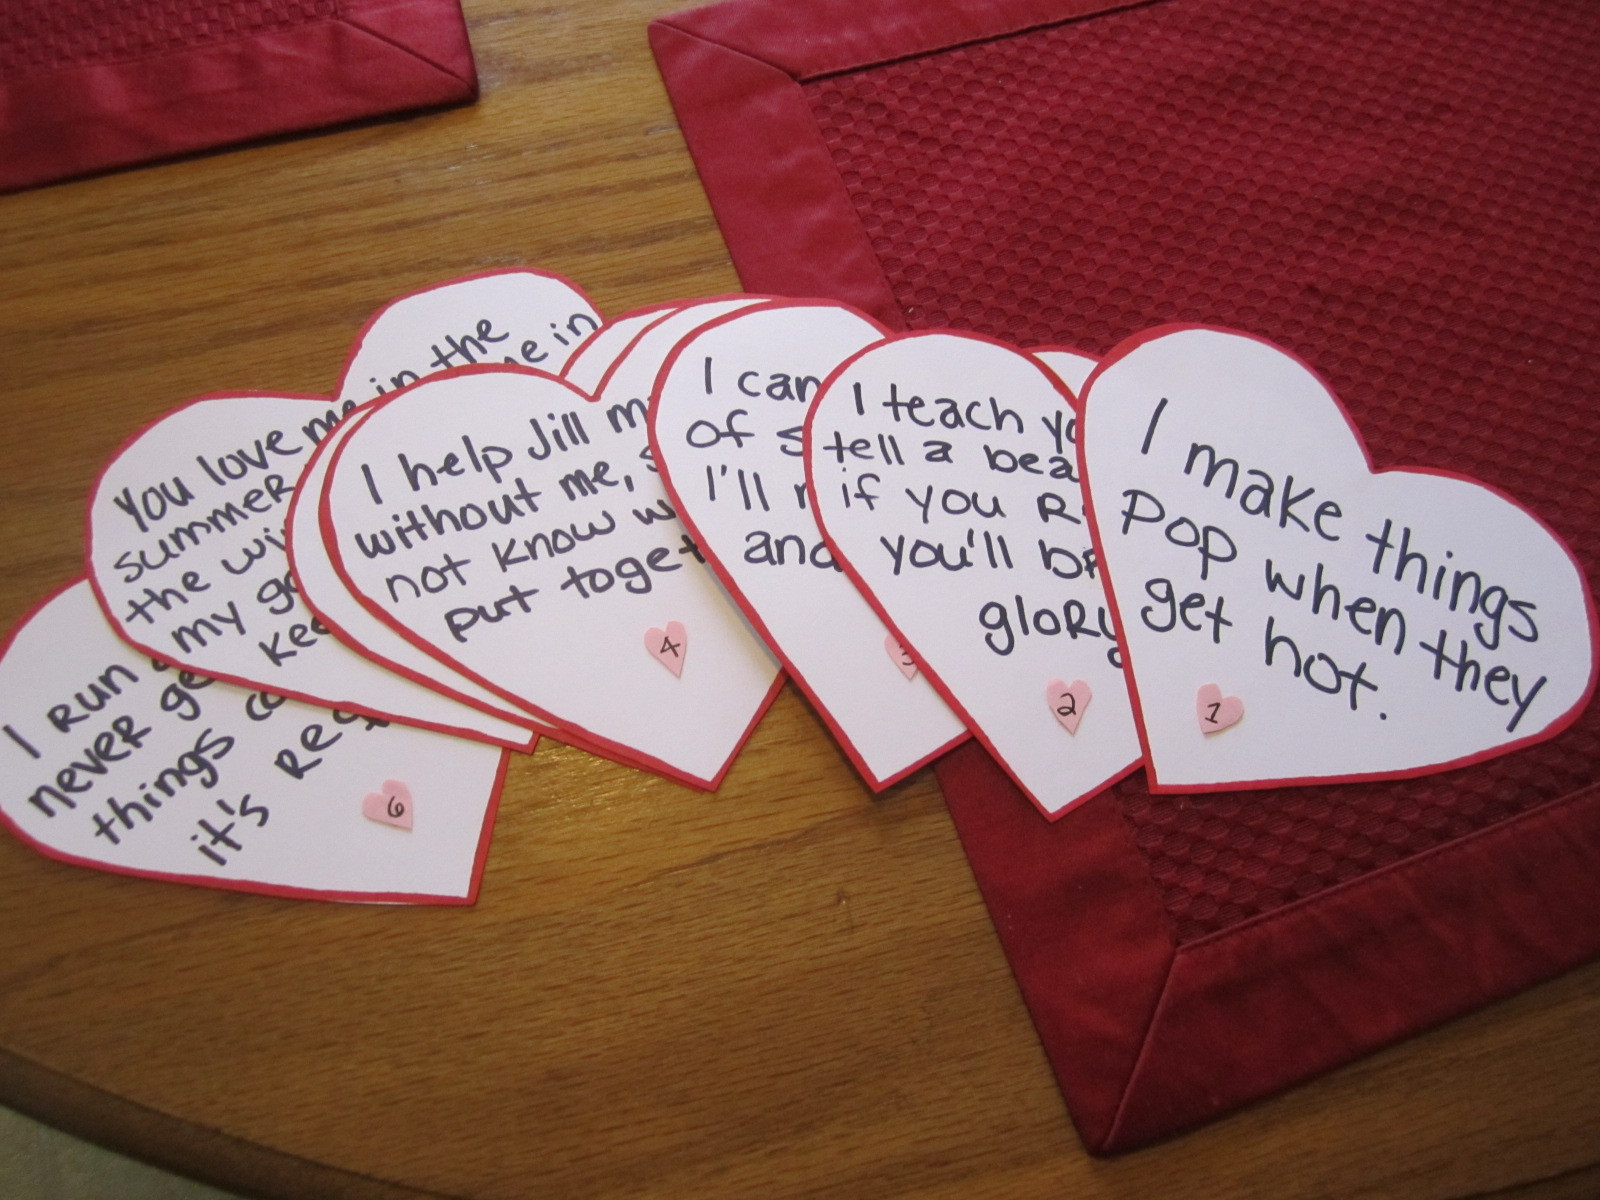 Valentine Day Creative Gift Ideas
 Ten DIY Valentine’s Day Gifts for him and her